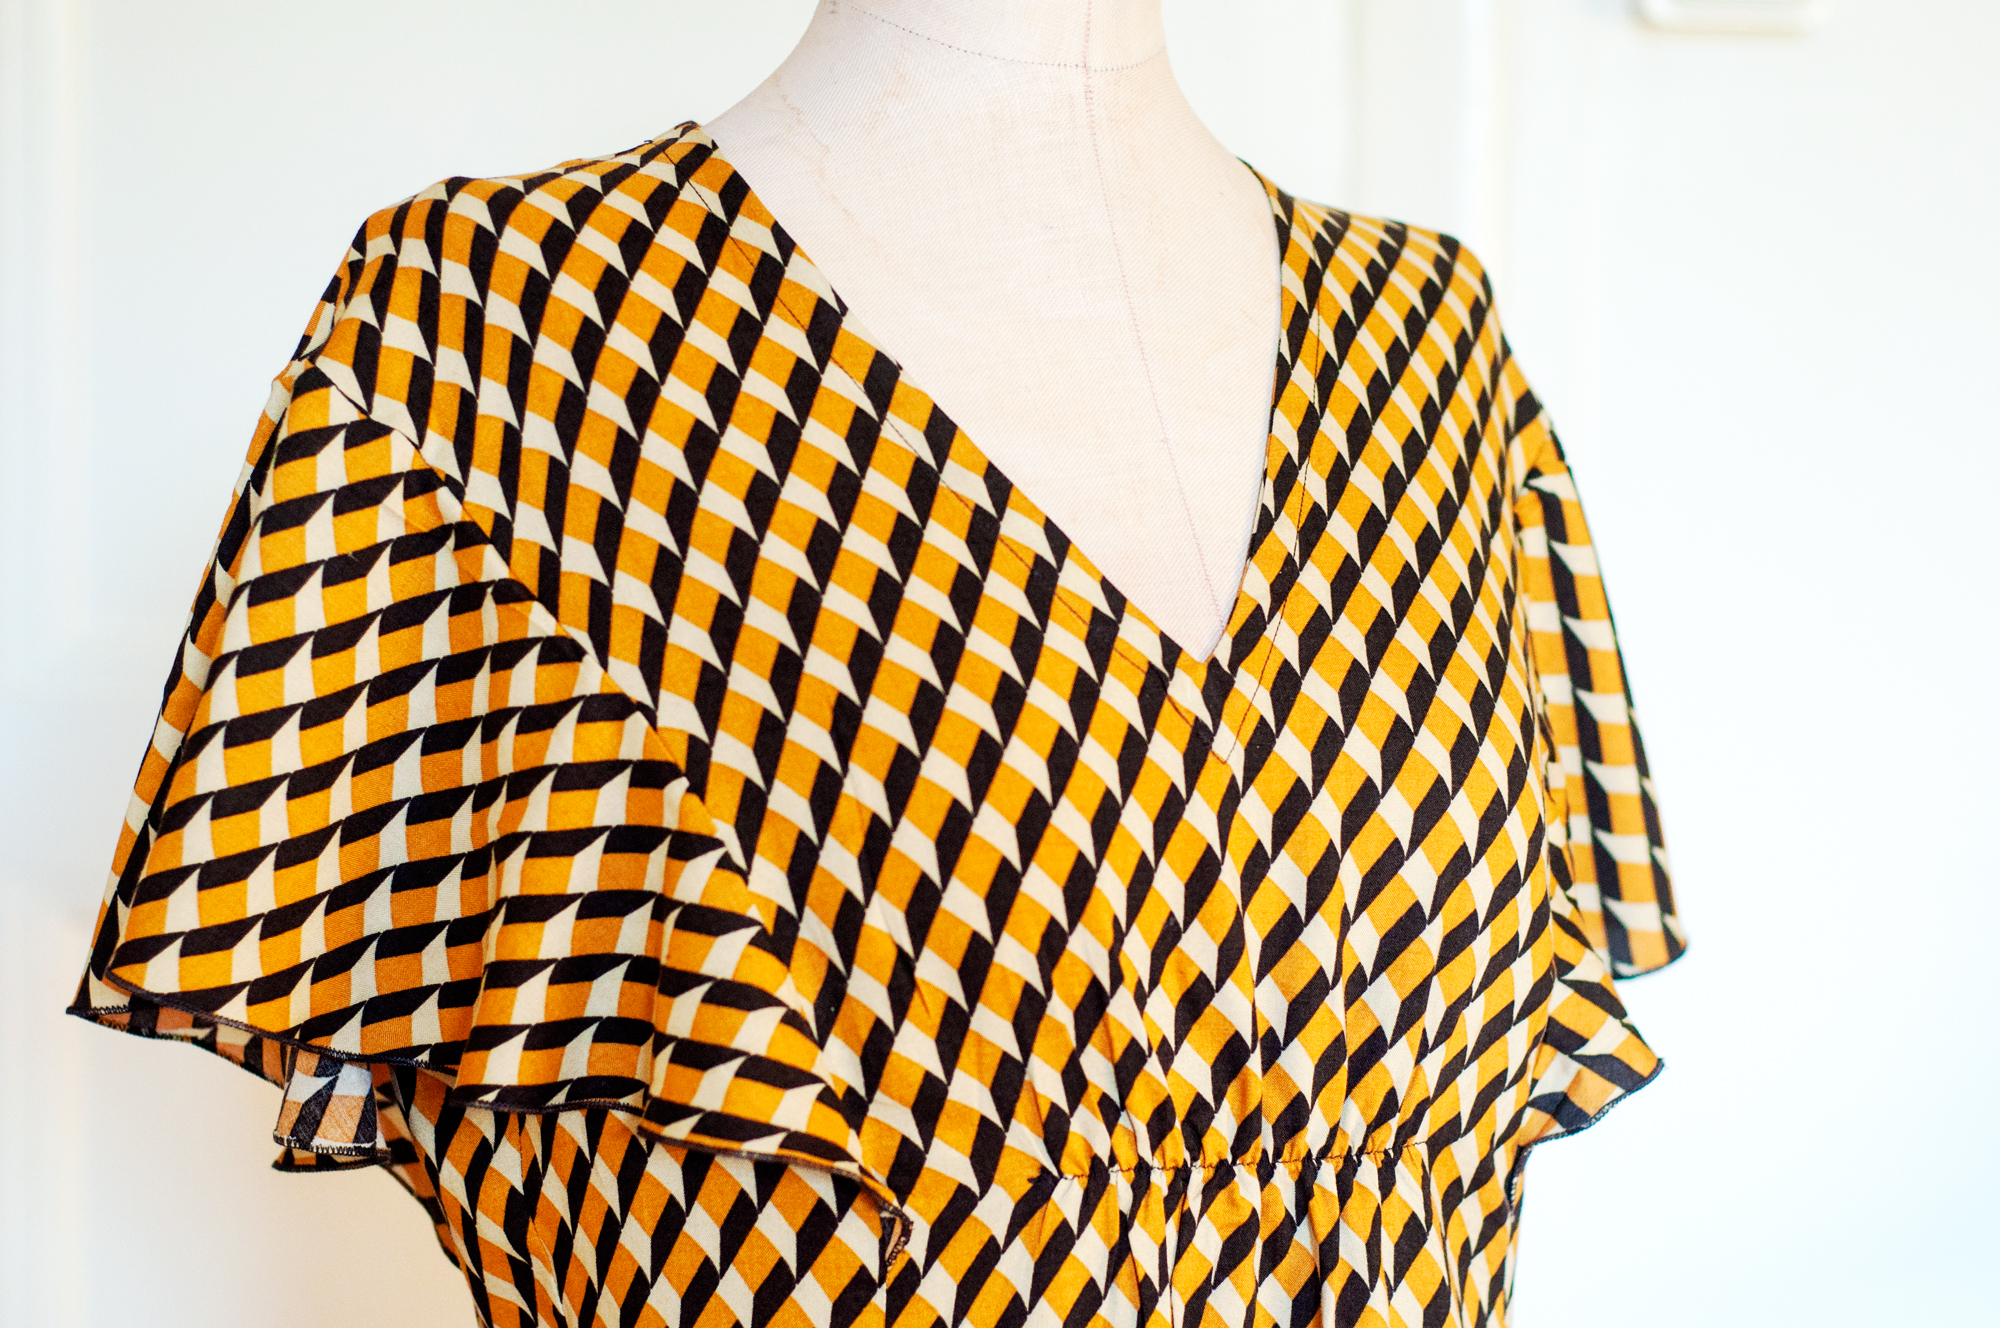 How to create a really neat neckline finish